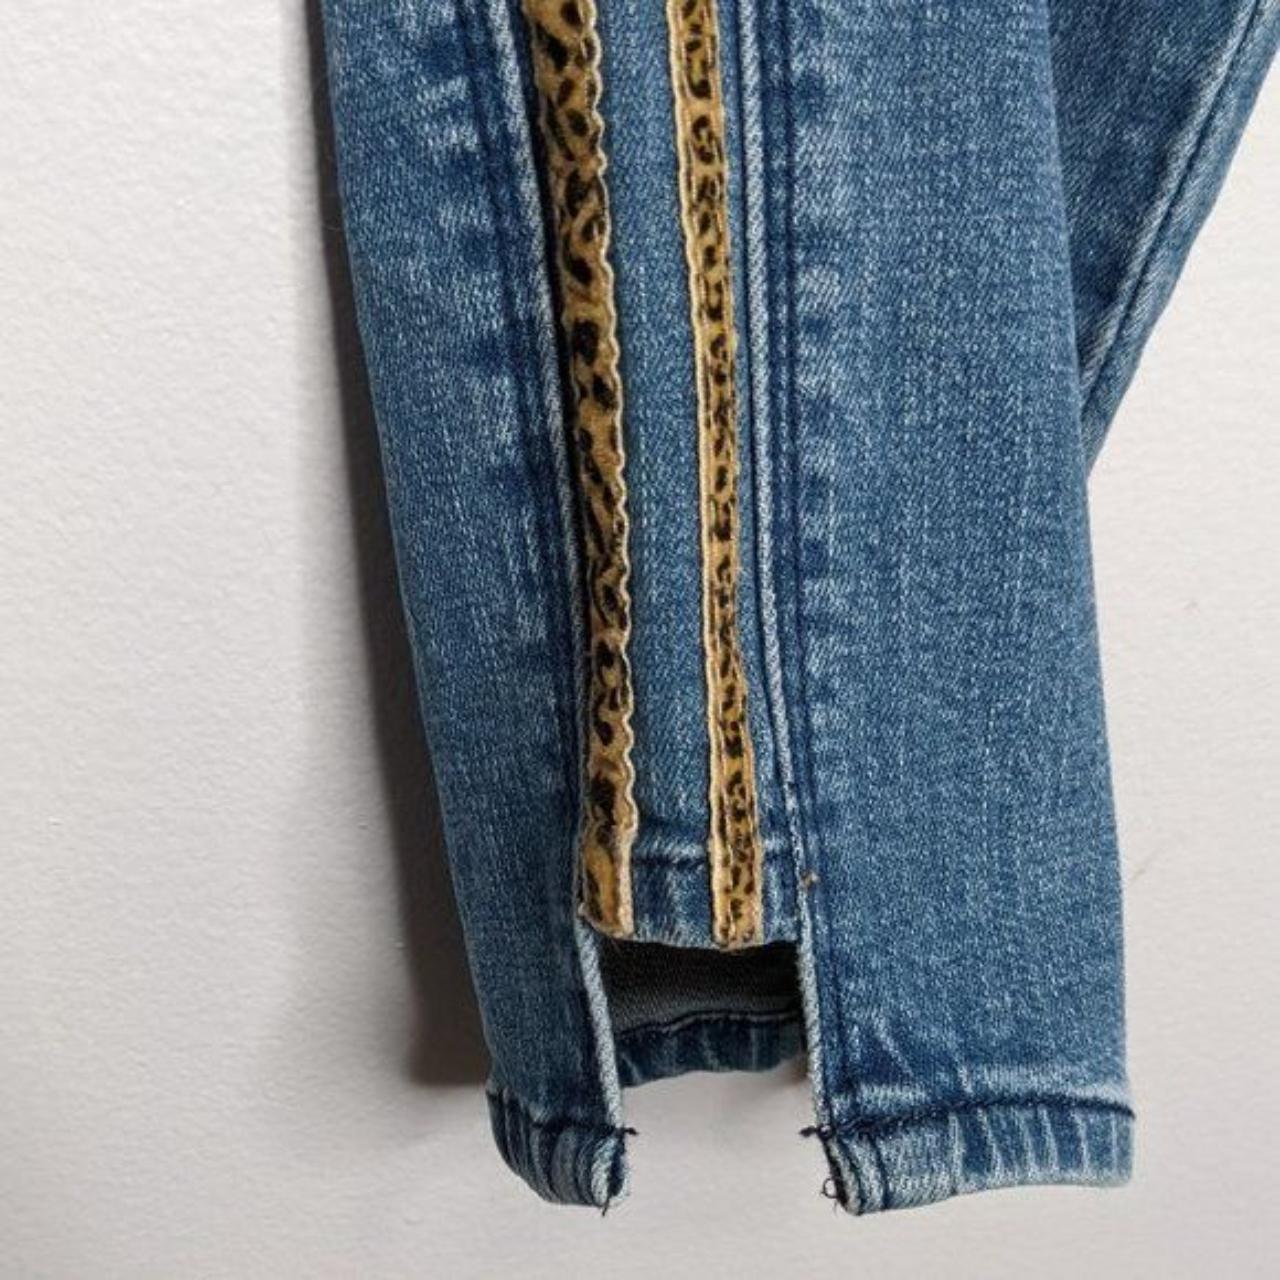 Product Image 4 - Check out these stretch denim